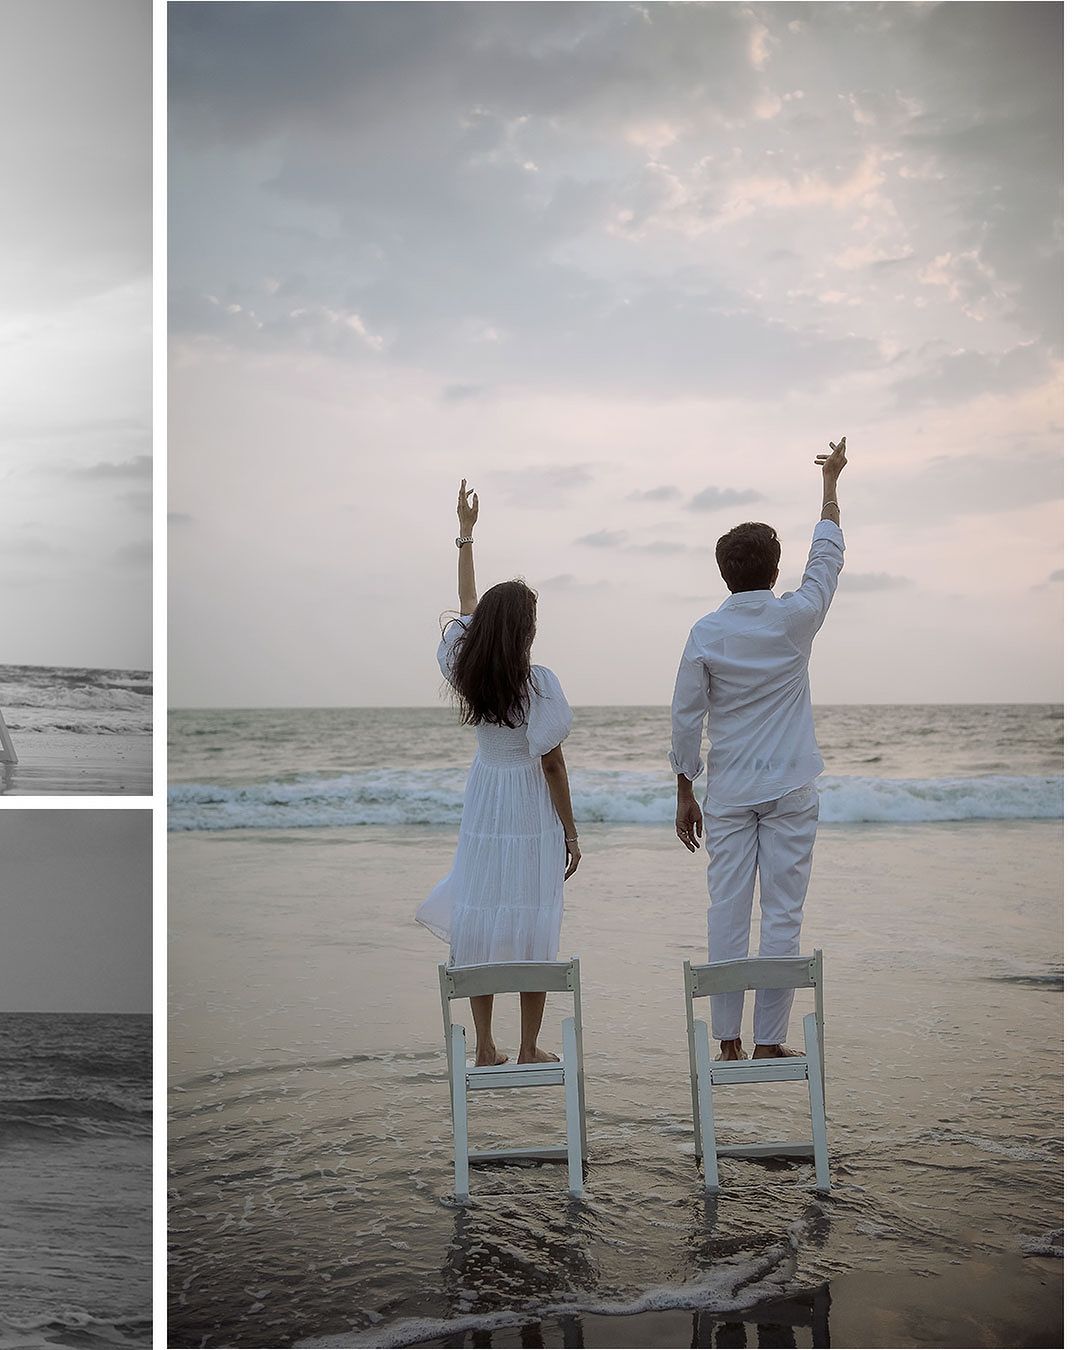 Enchanting Pre-Wedding Photoshoots in Kochi: Capturing Love Stories with PhotoToday Photography